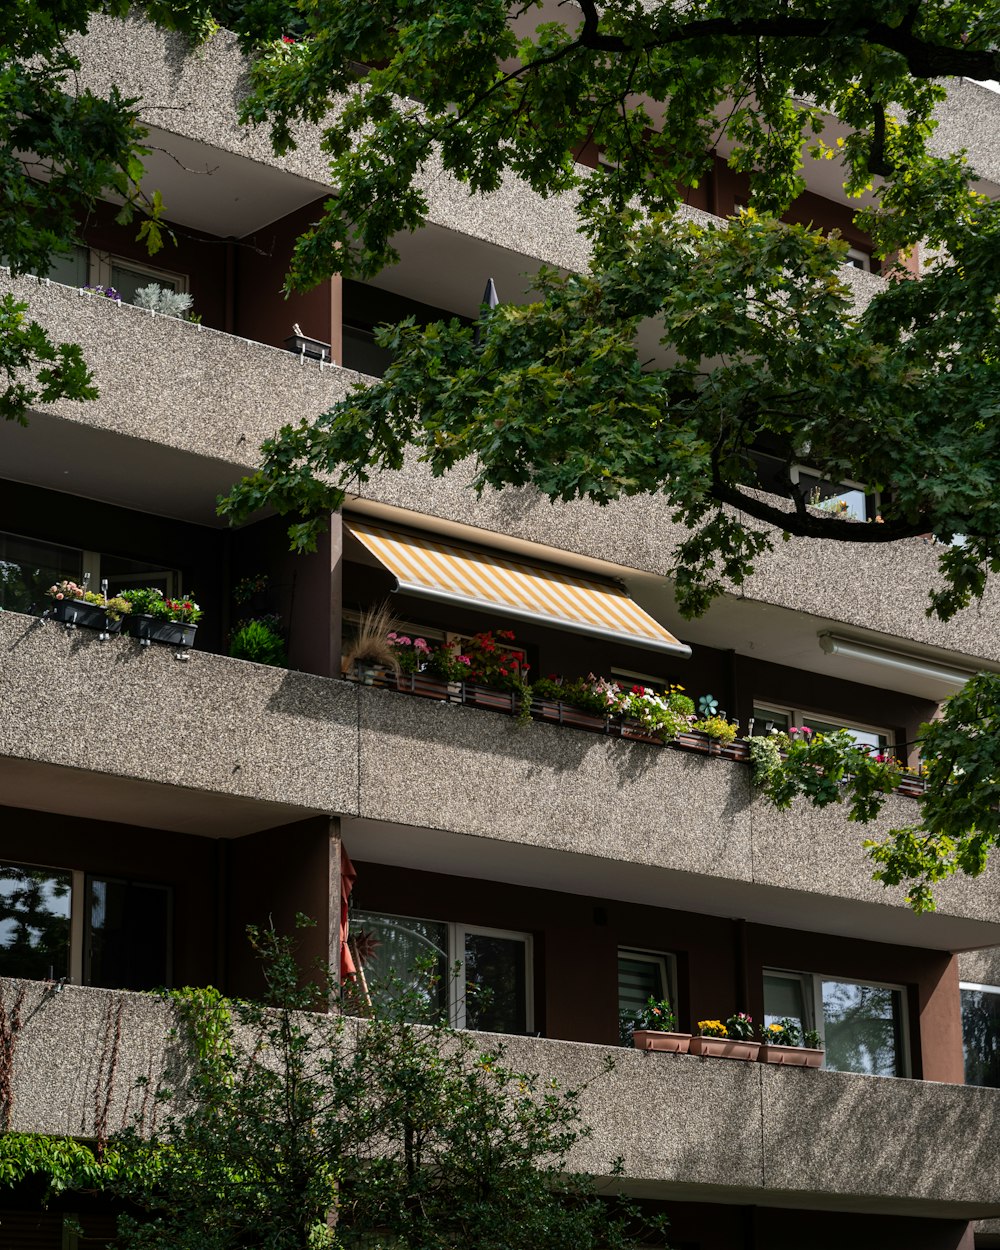 an apartment building with a balcony and flower boxes on the balconies